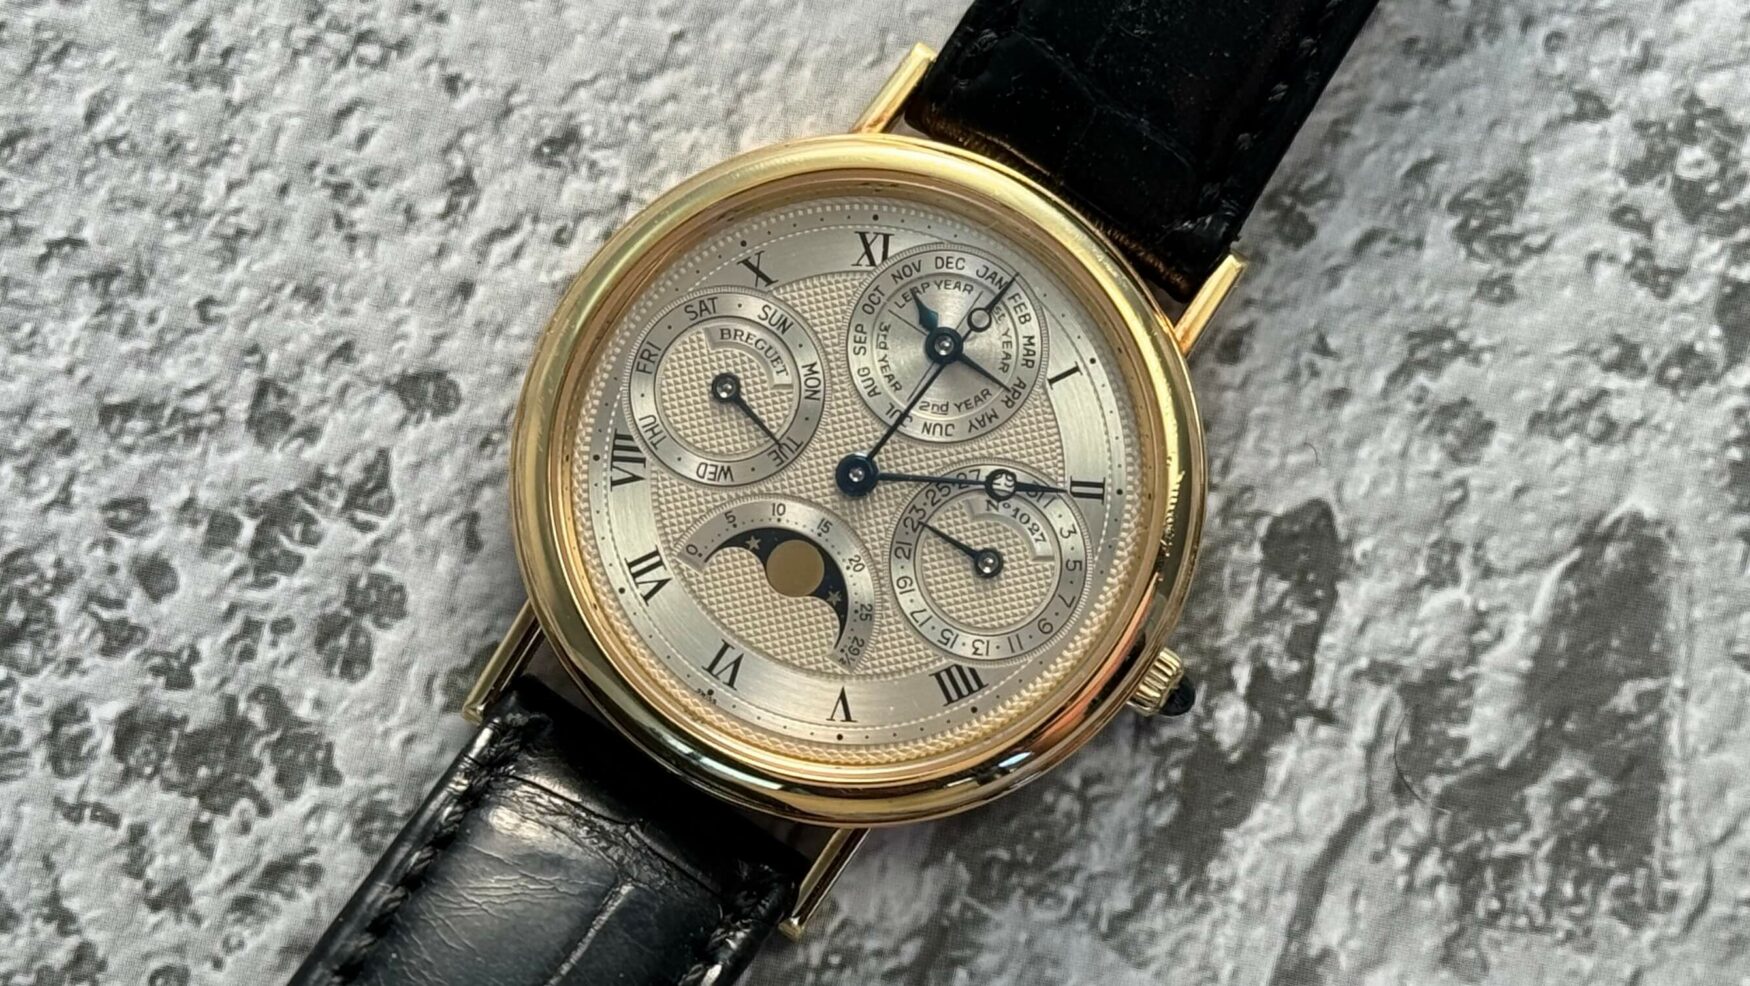 I gave up my prized Rolex and Lange for this gorgeous Breguet Calssique Perpetual Calendar 3057